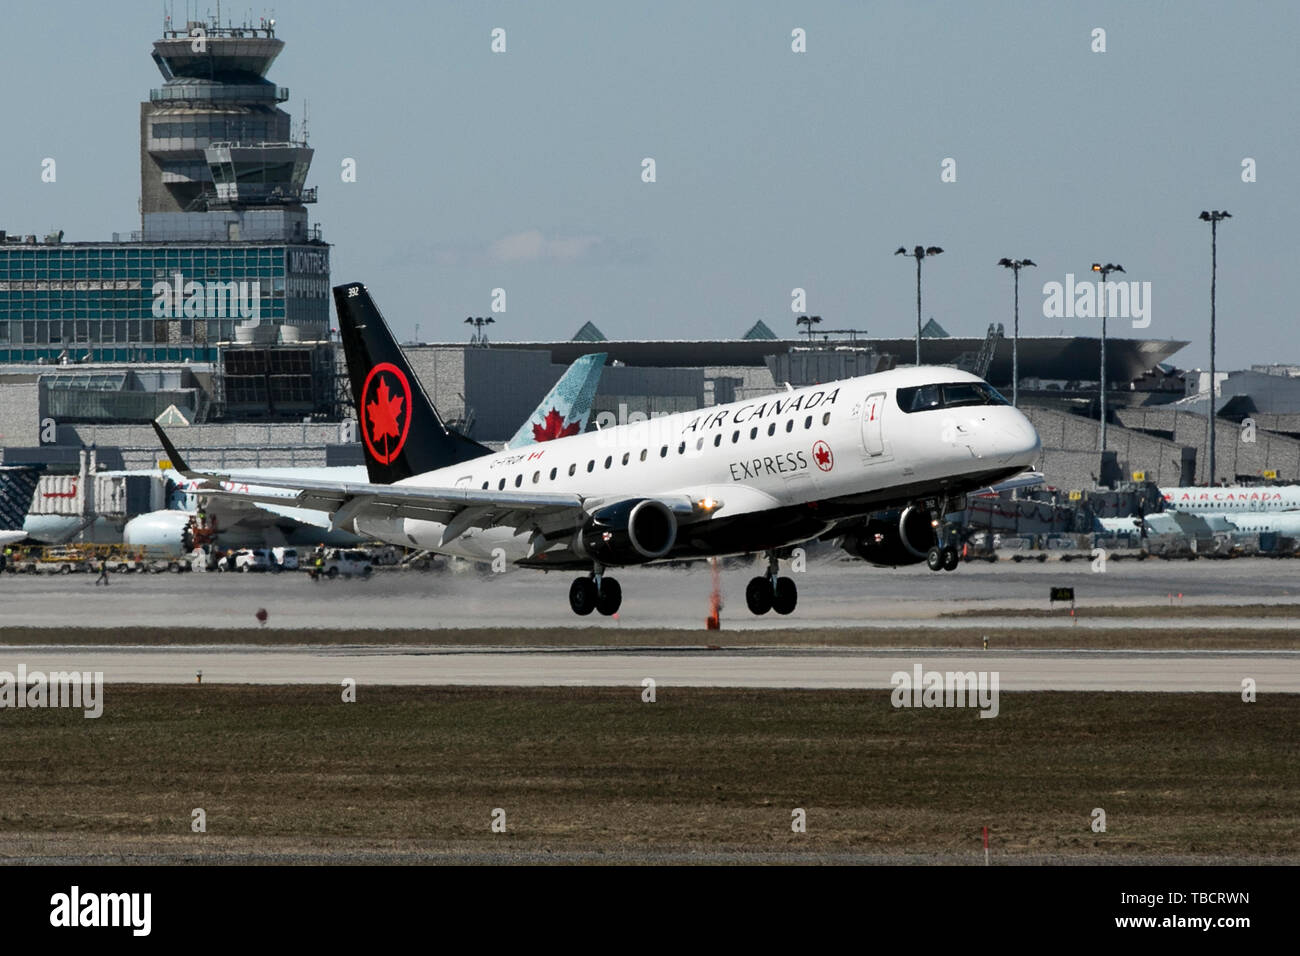 A Air Canada Express Embraer ERJ170 airplane is seen landing at Montréal-Pierre Elliott Trudeau International Airport in Montreal, Quebec, Canada, on  Stock Photo